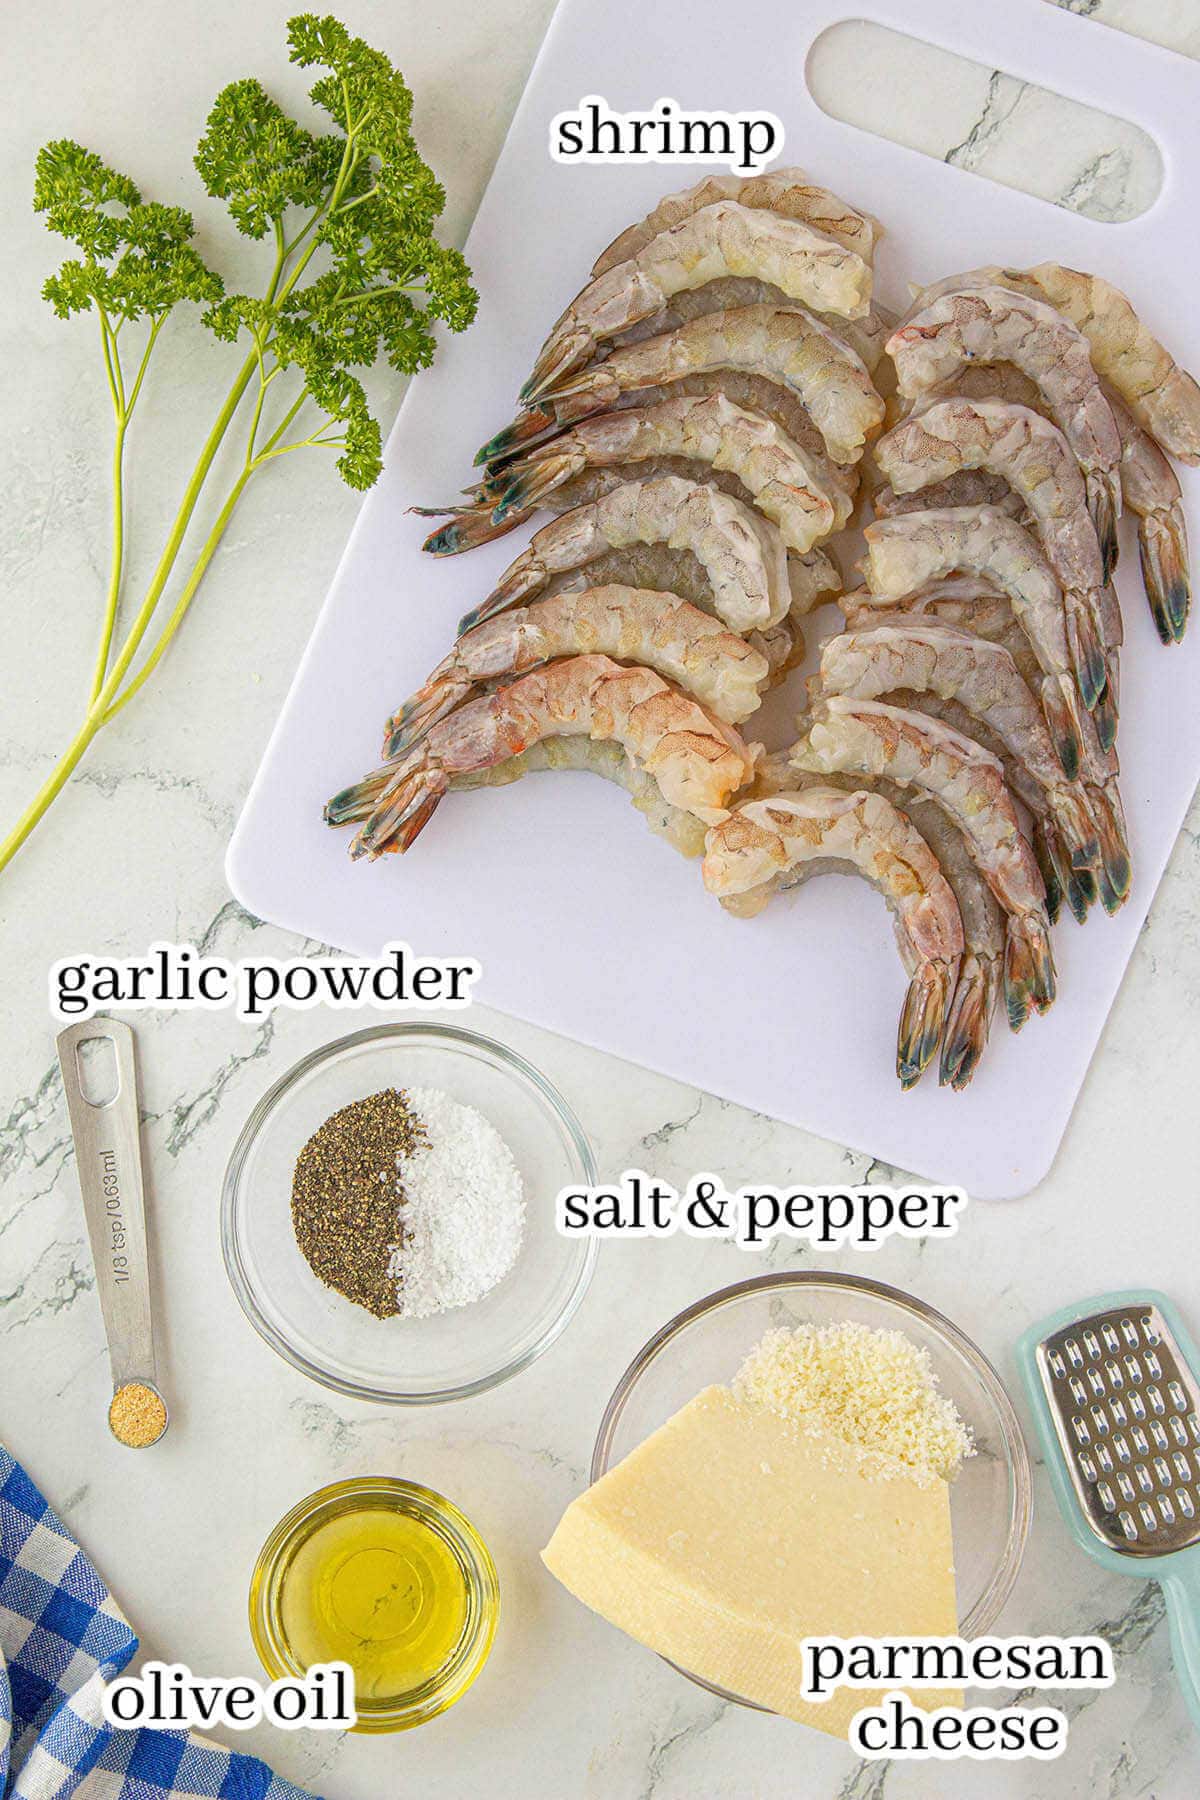 Ingredients to make shrimp recipe with print overlay.